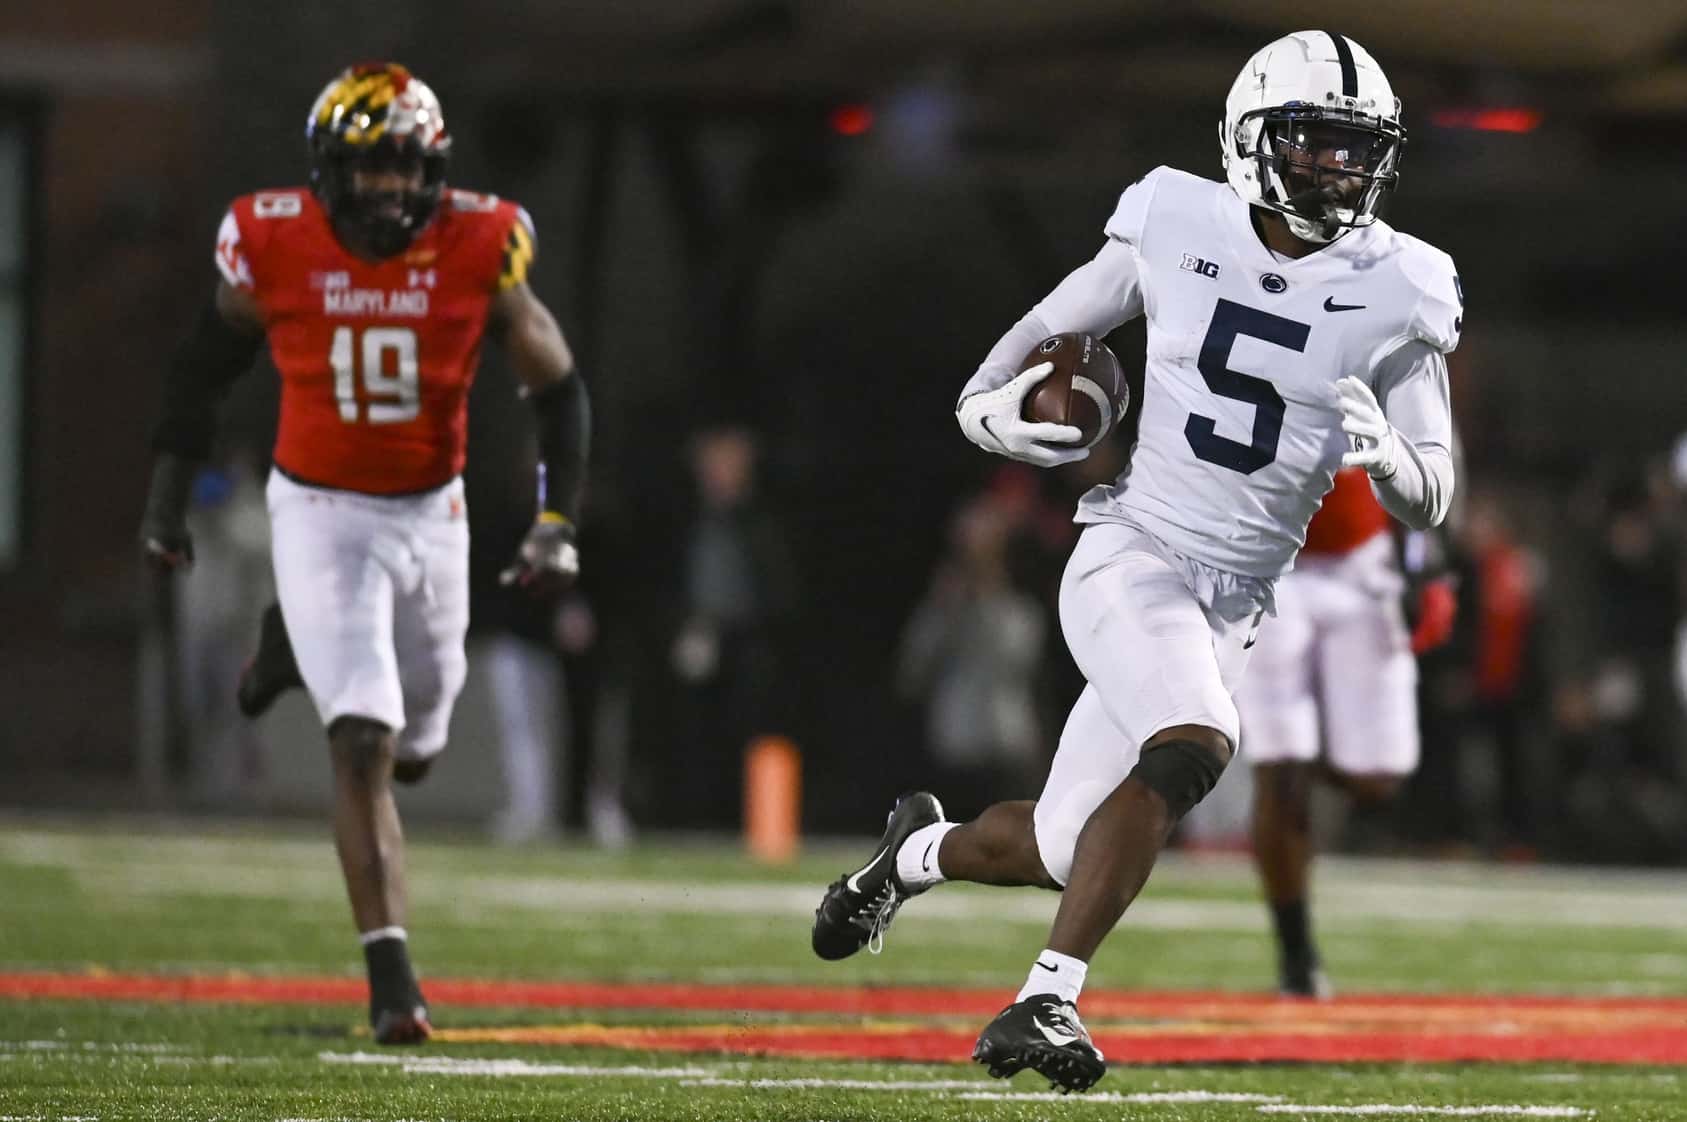 How will Penn State standout WR Jahan Dotson fit into Washington's